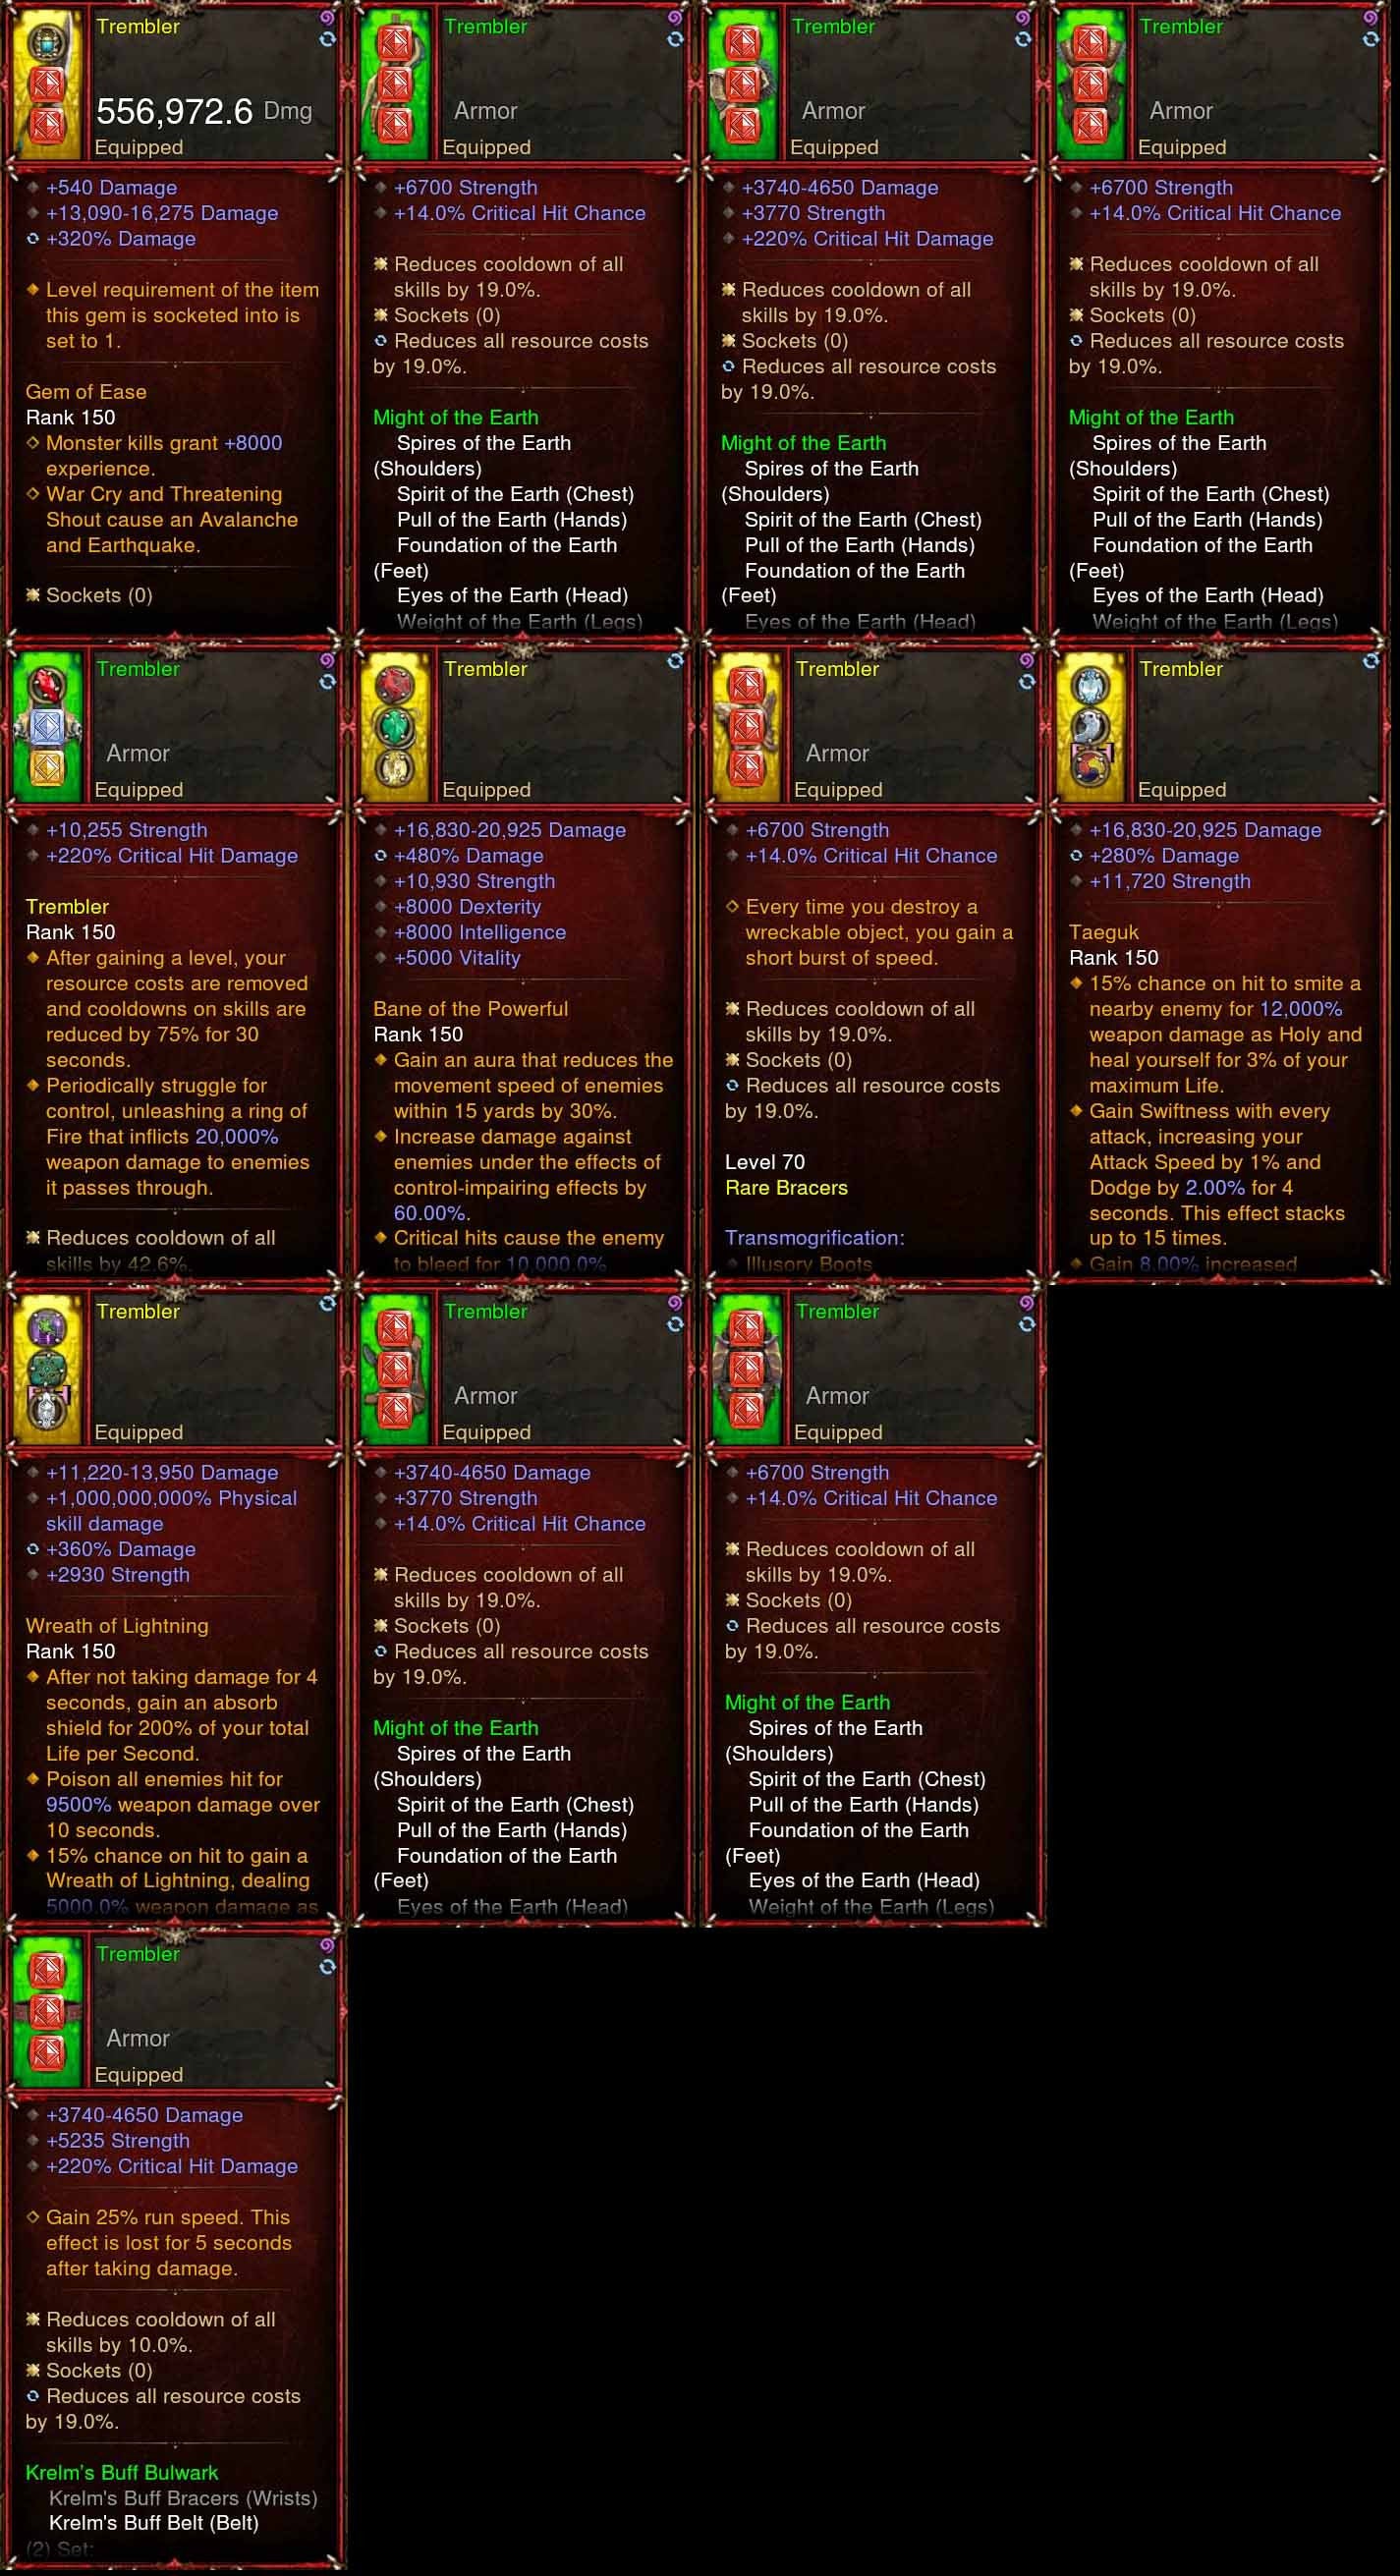 [Primal Ancient] [Quad DPS] Diablo 3 Immortal v5 TYPE-R Earth Barbarian Trembler Diablo 3 Mods ROS Seasonal and Non Seasonal Save Mod - Modded Items and Gear - Hacks - Cheats - Trainers for Playstation 4 - Playstation 5 - Nintendo Switch - Xbox One